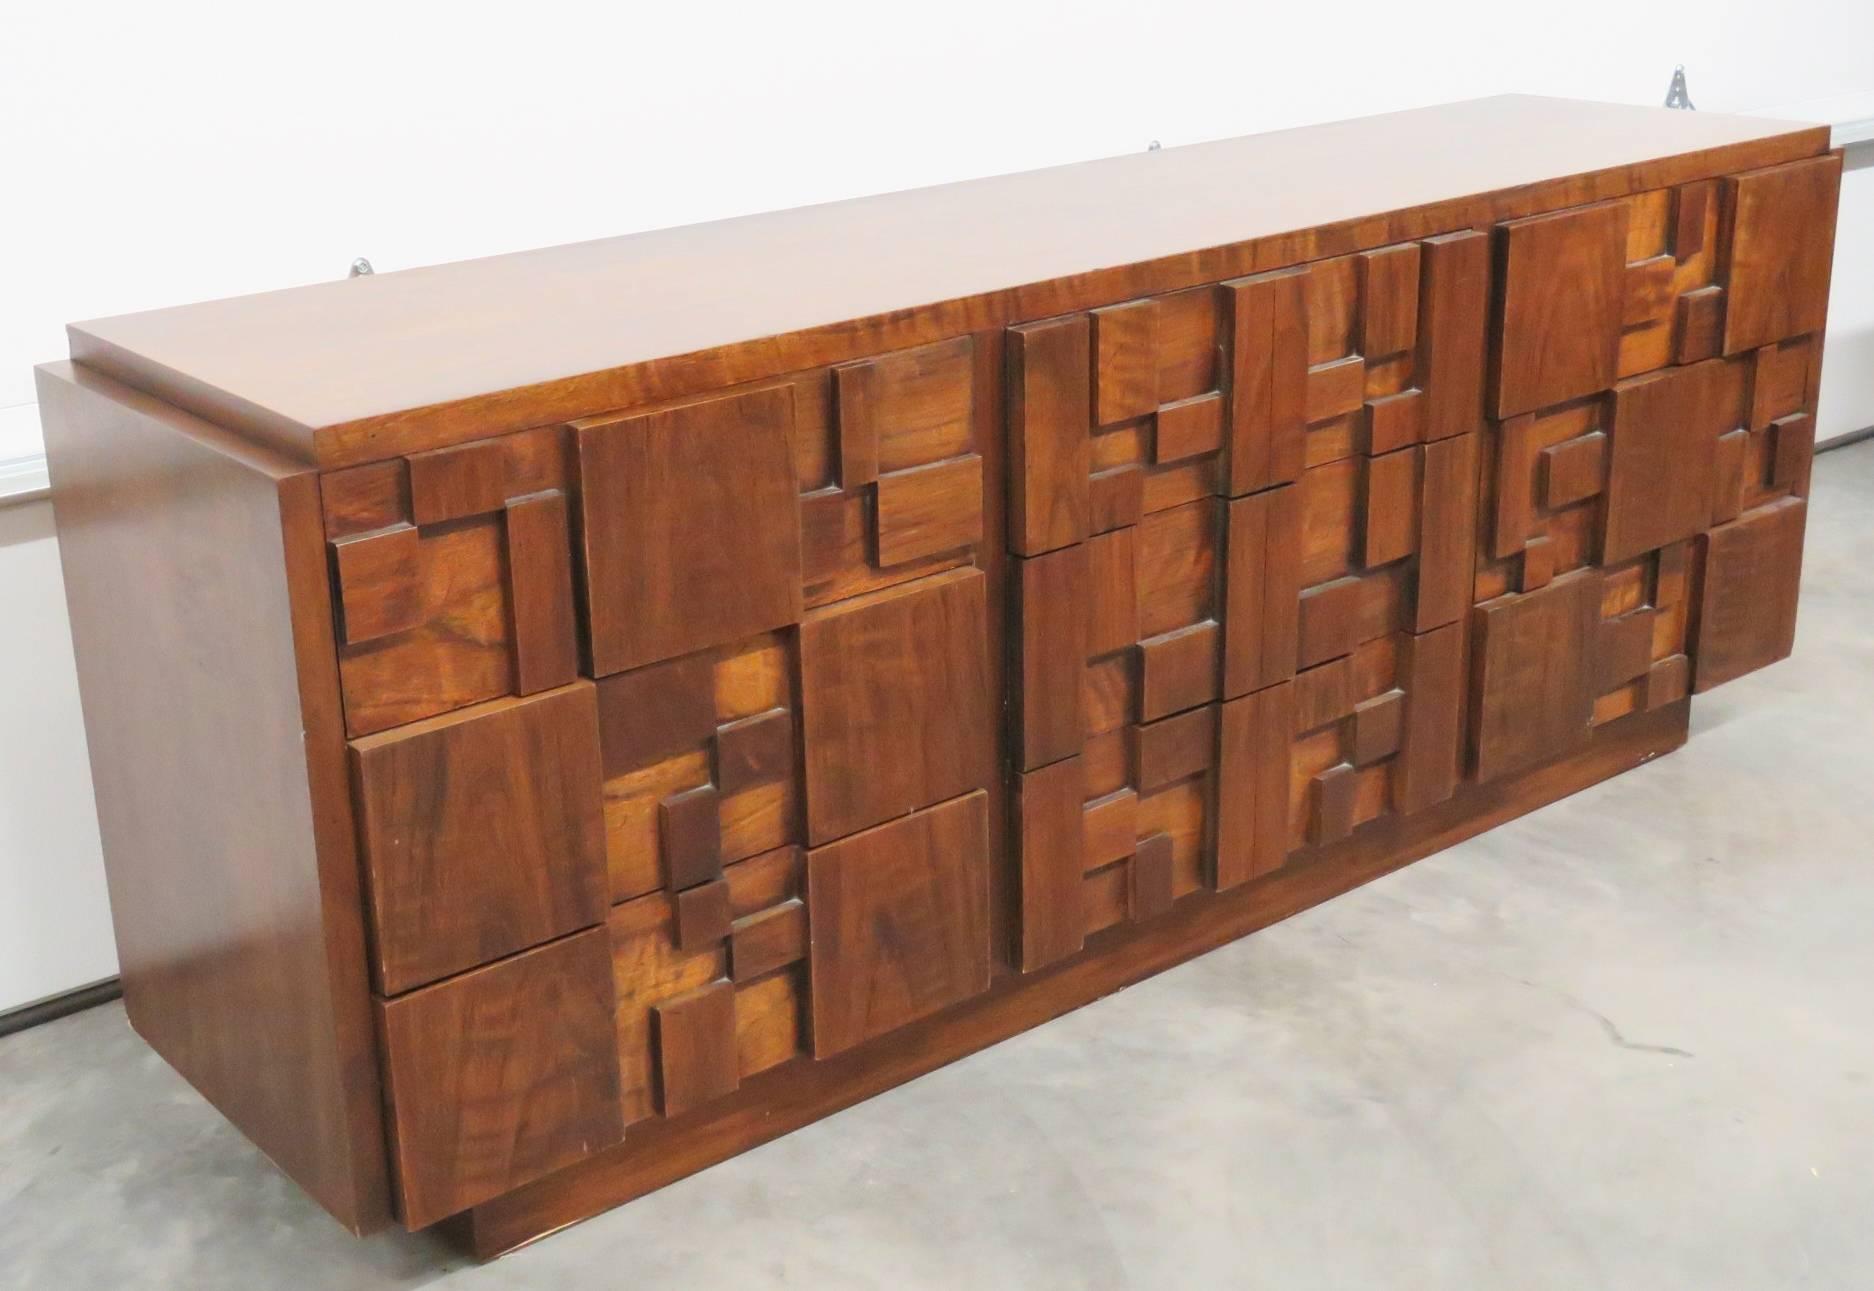 Dresser has a Brutalist style walnut wood nine-drawer dresser with two front panel doors manufactured by Lane Furniture Co from the 